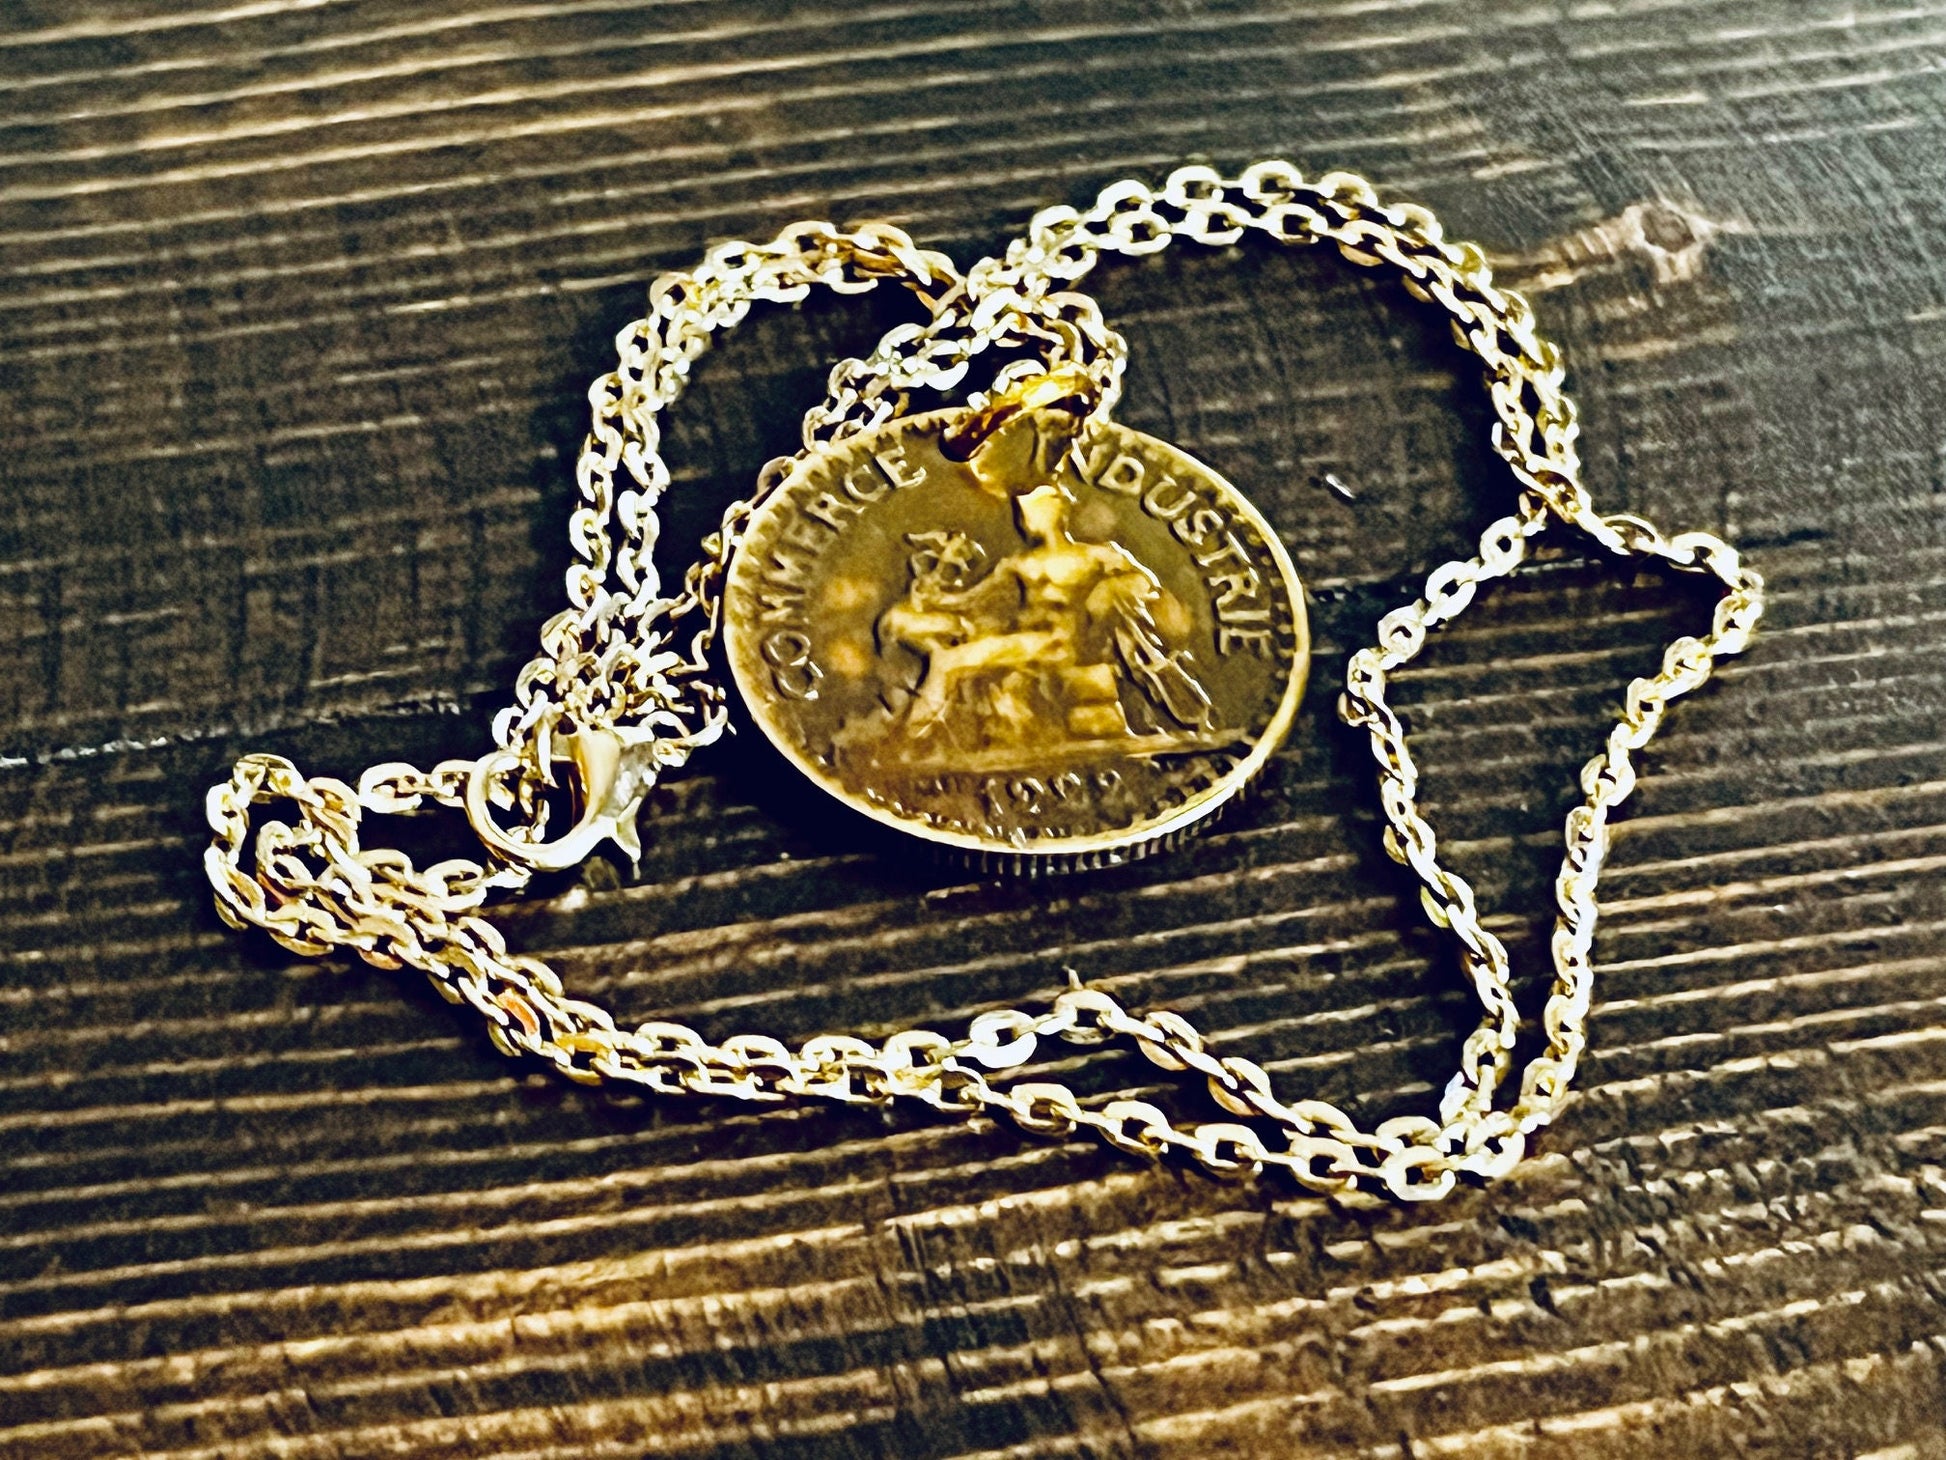 France Coin Necklace Bon Pour 1 Franc Pendant Chambers De Commerce Personal Handmade Jewelry Gift Friend Charm Him Her World Coin Collector